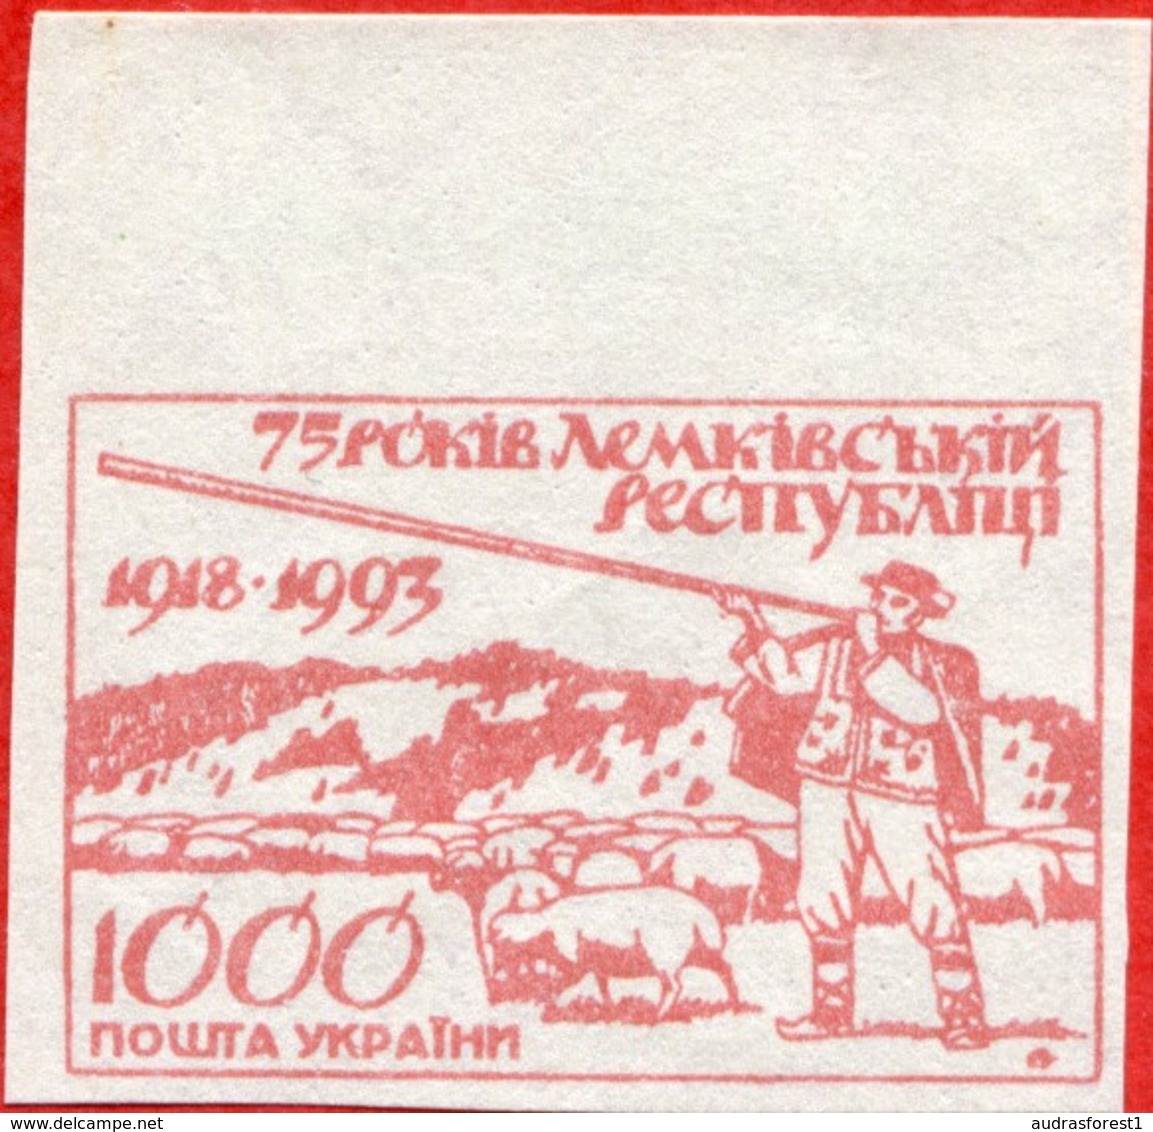 LEMKIVSKOJ shepherd with sheep and horn imperforate set of stamps without gum, issued in 1993 Ukraine Local Post;